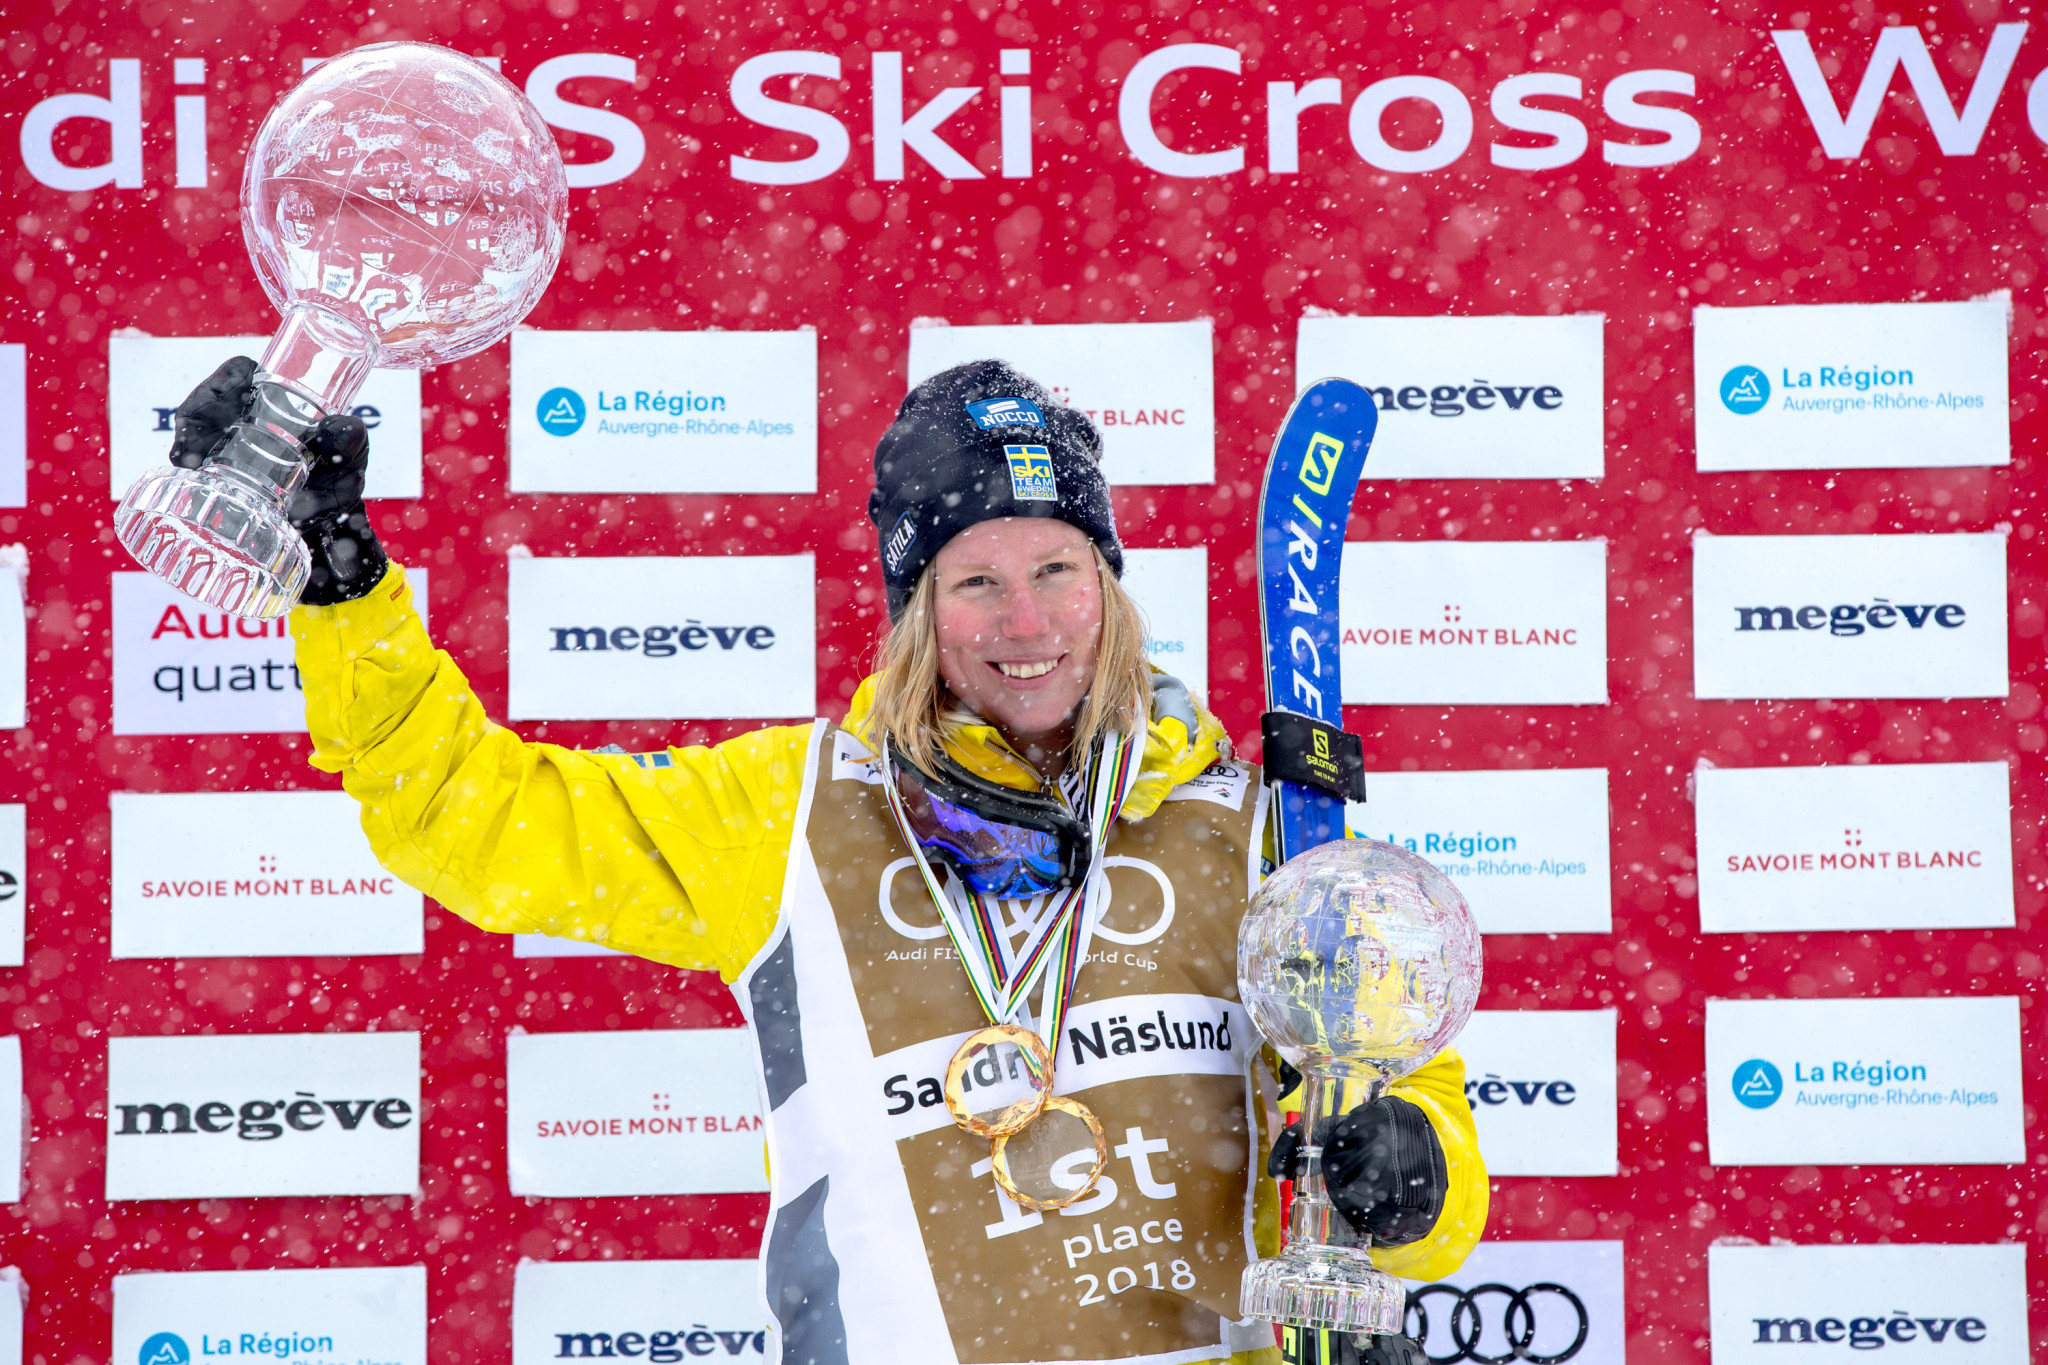 Two from two for Naeslund at Feldberg Ski Cross World Cup 